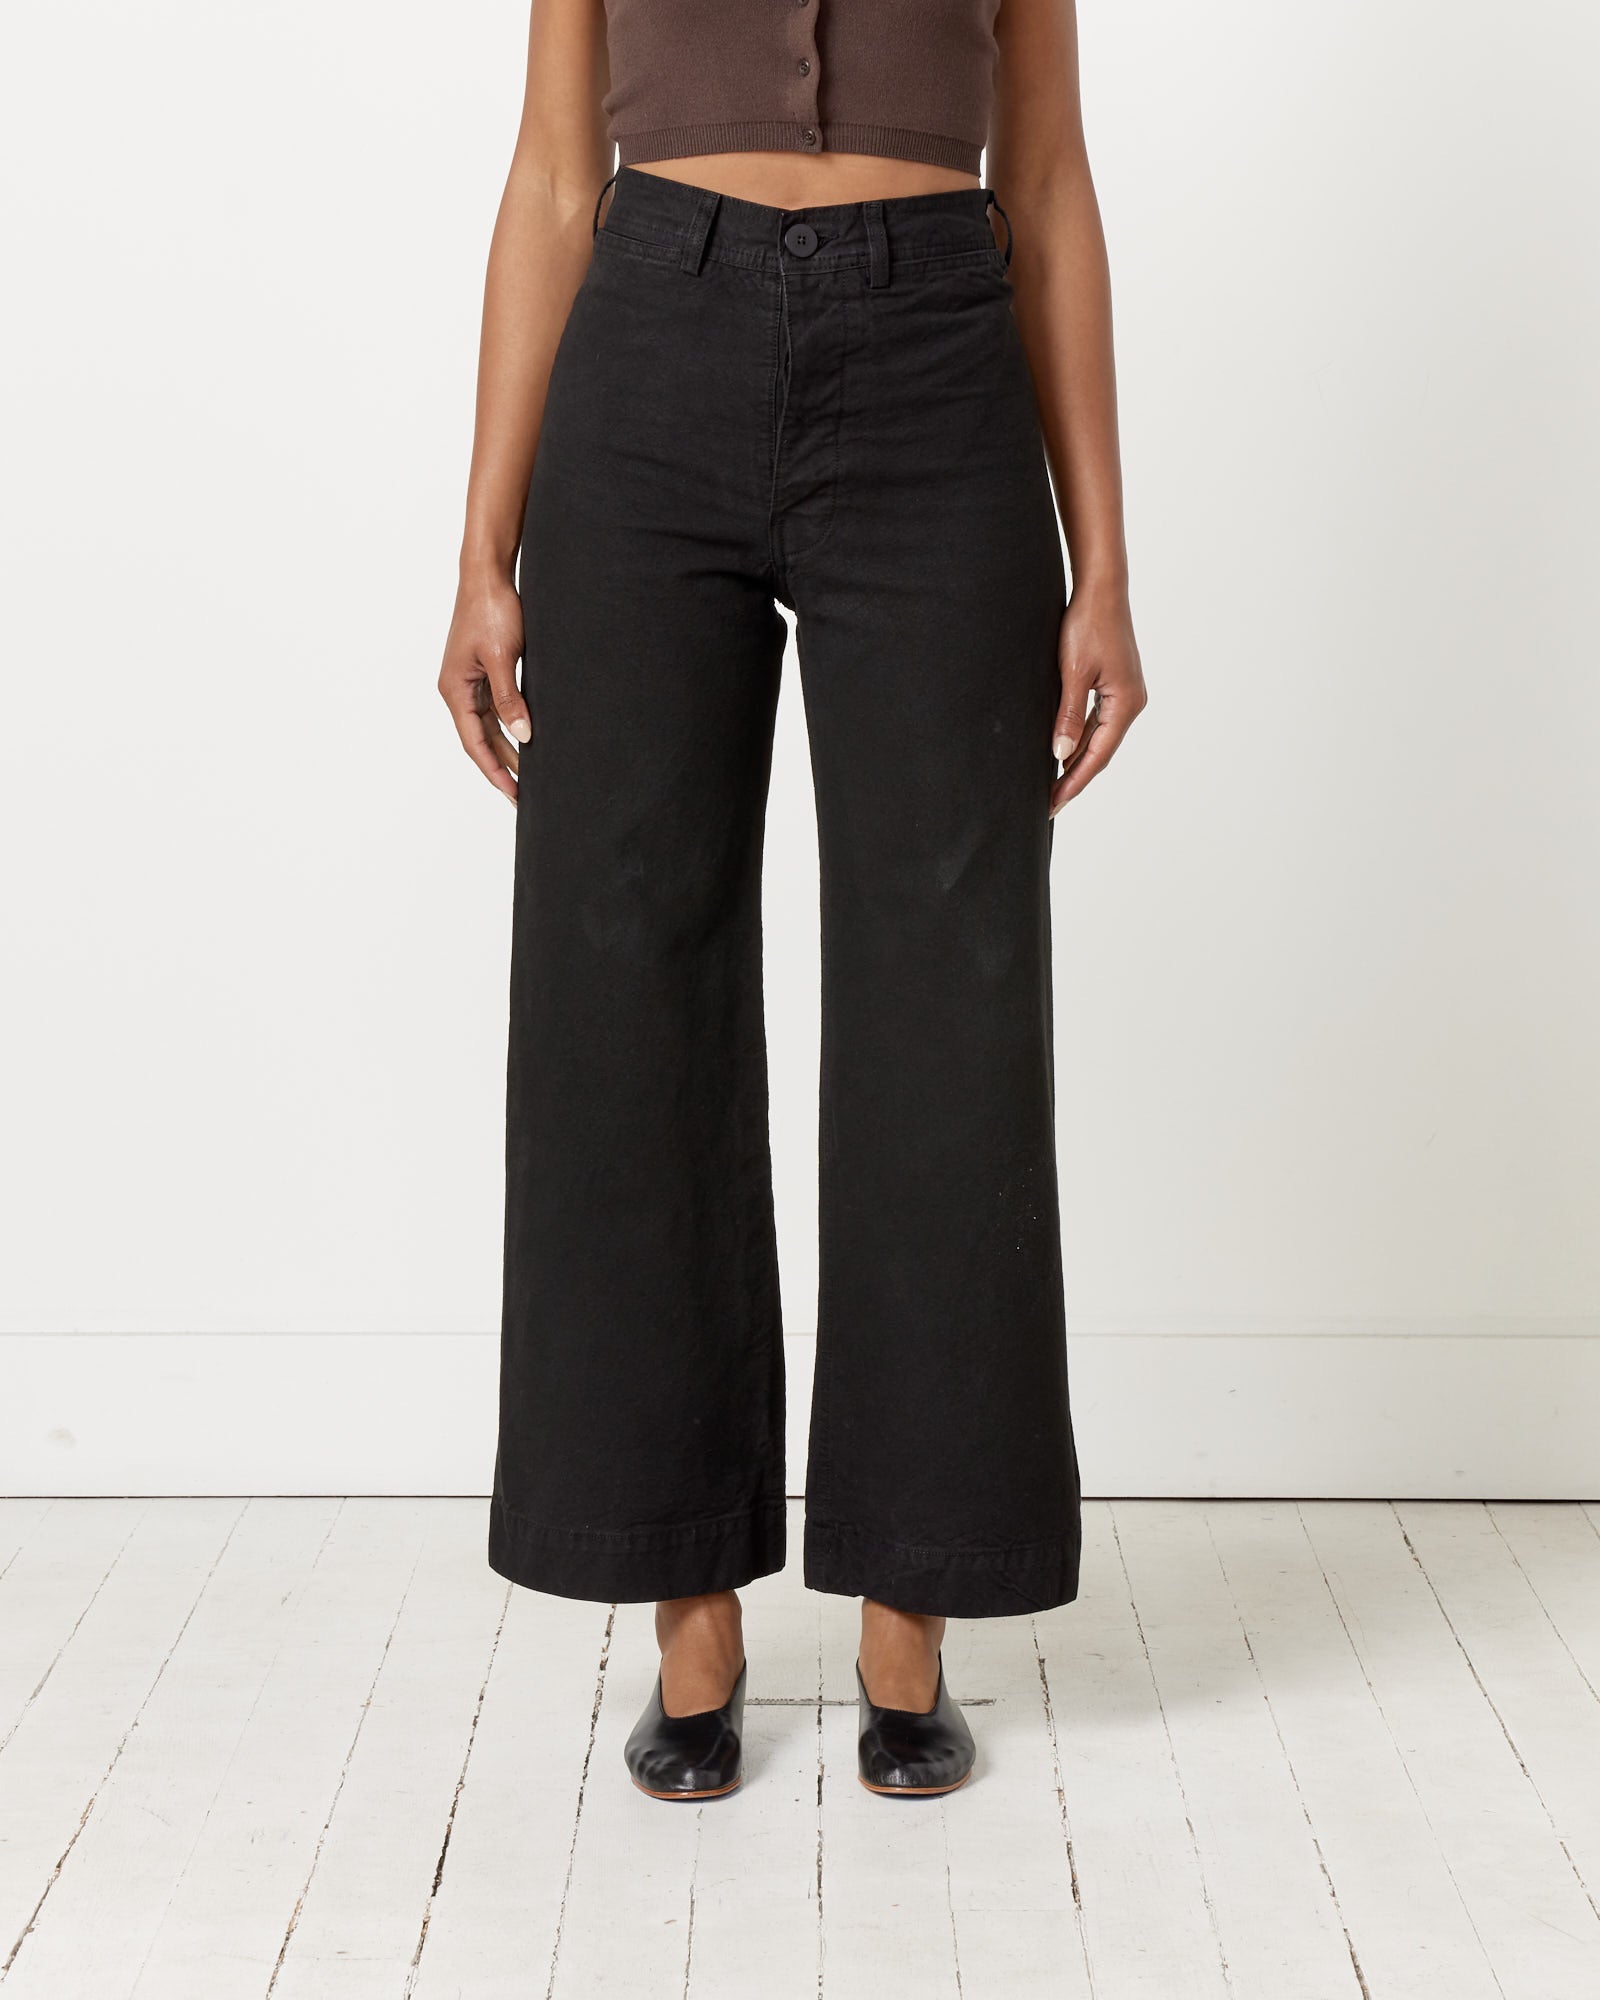 The Sailor Pant in Black